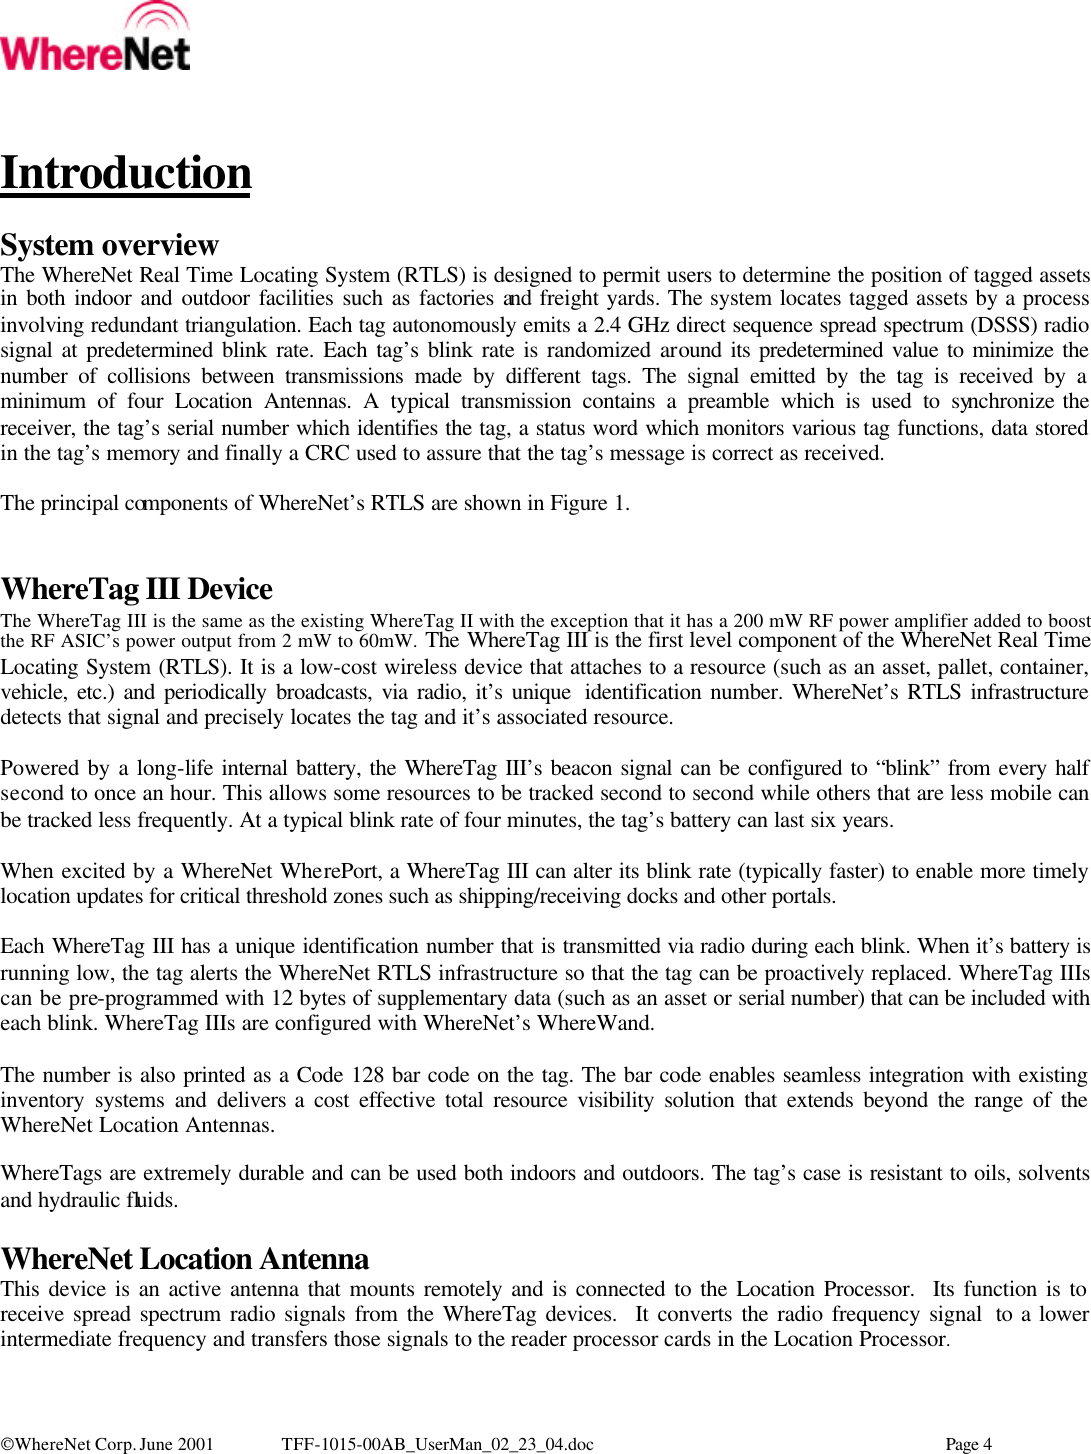   WhereNet Corp. June 2001 TFF-1015-00AB_UserMan_02_23_04.doc    Page 4    Introduction  System overview The WhereNet Real Time Locating System (RTLS) is designed to permit users to determine the position of tagged assets in both indoor and outdoor facilities such as factories and freight yards. The system locates tagged assets by a process involving redundant triangulation. Each tag autonomously emits a 2.4 GHz direct sequence spread spectrum (DSSS) radio signal at predetermined blink rate. Each tag’s blink rate is randomized around its predetermined value to minimize the number of collisions between transmissions made by different tags. The signal emitted by the tag is received by a minimum of four Location Antennas. A typical transmission contains a preamble which is used to synchronize the receiver, the tag’s serial number which identifies the tag, a status word which monitors various tag functions, data stored in the tag’s memory and finally a CRC used to assure that the tag’s message is correct as received.   The principal components of WhereNet’s RTLS are shown in Figure 1.   WhereTag III Device The WhereTag III is the same as the existing WhereTag II with the exception that it has a 200 mW RF power amplifier added to boost the RF ASIC’s power output from 2 mW to 60mW. The WhereTag III is the first level component of the WhereNet Real Time Locating System (RTLS). It is a low-cost wireless device that attaches to a resource (such as an asset, pallet, container, vehicle, etc.) and periodically broadcasts, via radio, it’s unique  identification number. WhereNet’s RTLS infrastructure detects that signal and precisely locates the tag and it’s associated resource.  Powered by a long-life internal battery, the WhereTag III’s beacon signal can be configured to “blink” from every half second to once an hour. This allows some resources to be tracked second to second while others that are less mobile can be tracked less frequently. At a typical blink rate of four minutes, the tag’s battery can last six years.  When excited by a WhereNet WherePort, a WhereTag III can alter its blink rate (typically faster) to enable more timely location updates for critical threshold zones such as shipping/receiving docks and other portals.  Each WhereTag III has a unique identification number that is transmitted via radio during each blink. When it’s battery is running low, the tag alerts the WhereNet RTLS infrastructure so that the tag can be proactively replaced. WhereTag IIIs can be pre-programmed with 12 bytes of supplementary data (such as an asset or serial number) that can be included with each blink. WhereTag IIIs are configured with WhereNet’s WhereWand.  The number is also printed as a Code 128 bar code on the tag. The bar code enables seamless integration with existing inventory systems and delivers a cost effective total resource visibility solution that extends beyond the range of the WhereNet Location Antennas.  WhereTags are extremely durable and can be used both indoors and outdoors. The tag’s case is resistant to oils, solvents and hydraulic fluids.  WhereNet Location Antenna This device is an active antenna that mounts remotely and is connected to the Location Processor.  Its function is to receive spread spectrum radio signals from the WhereTag devices.  It converts the radio frequency signal  to a lower intermediate frequency and transfers those signals to the reader processor cards in the Location Processor.   